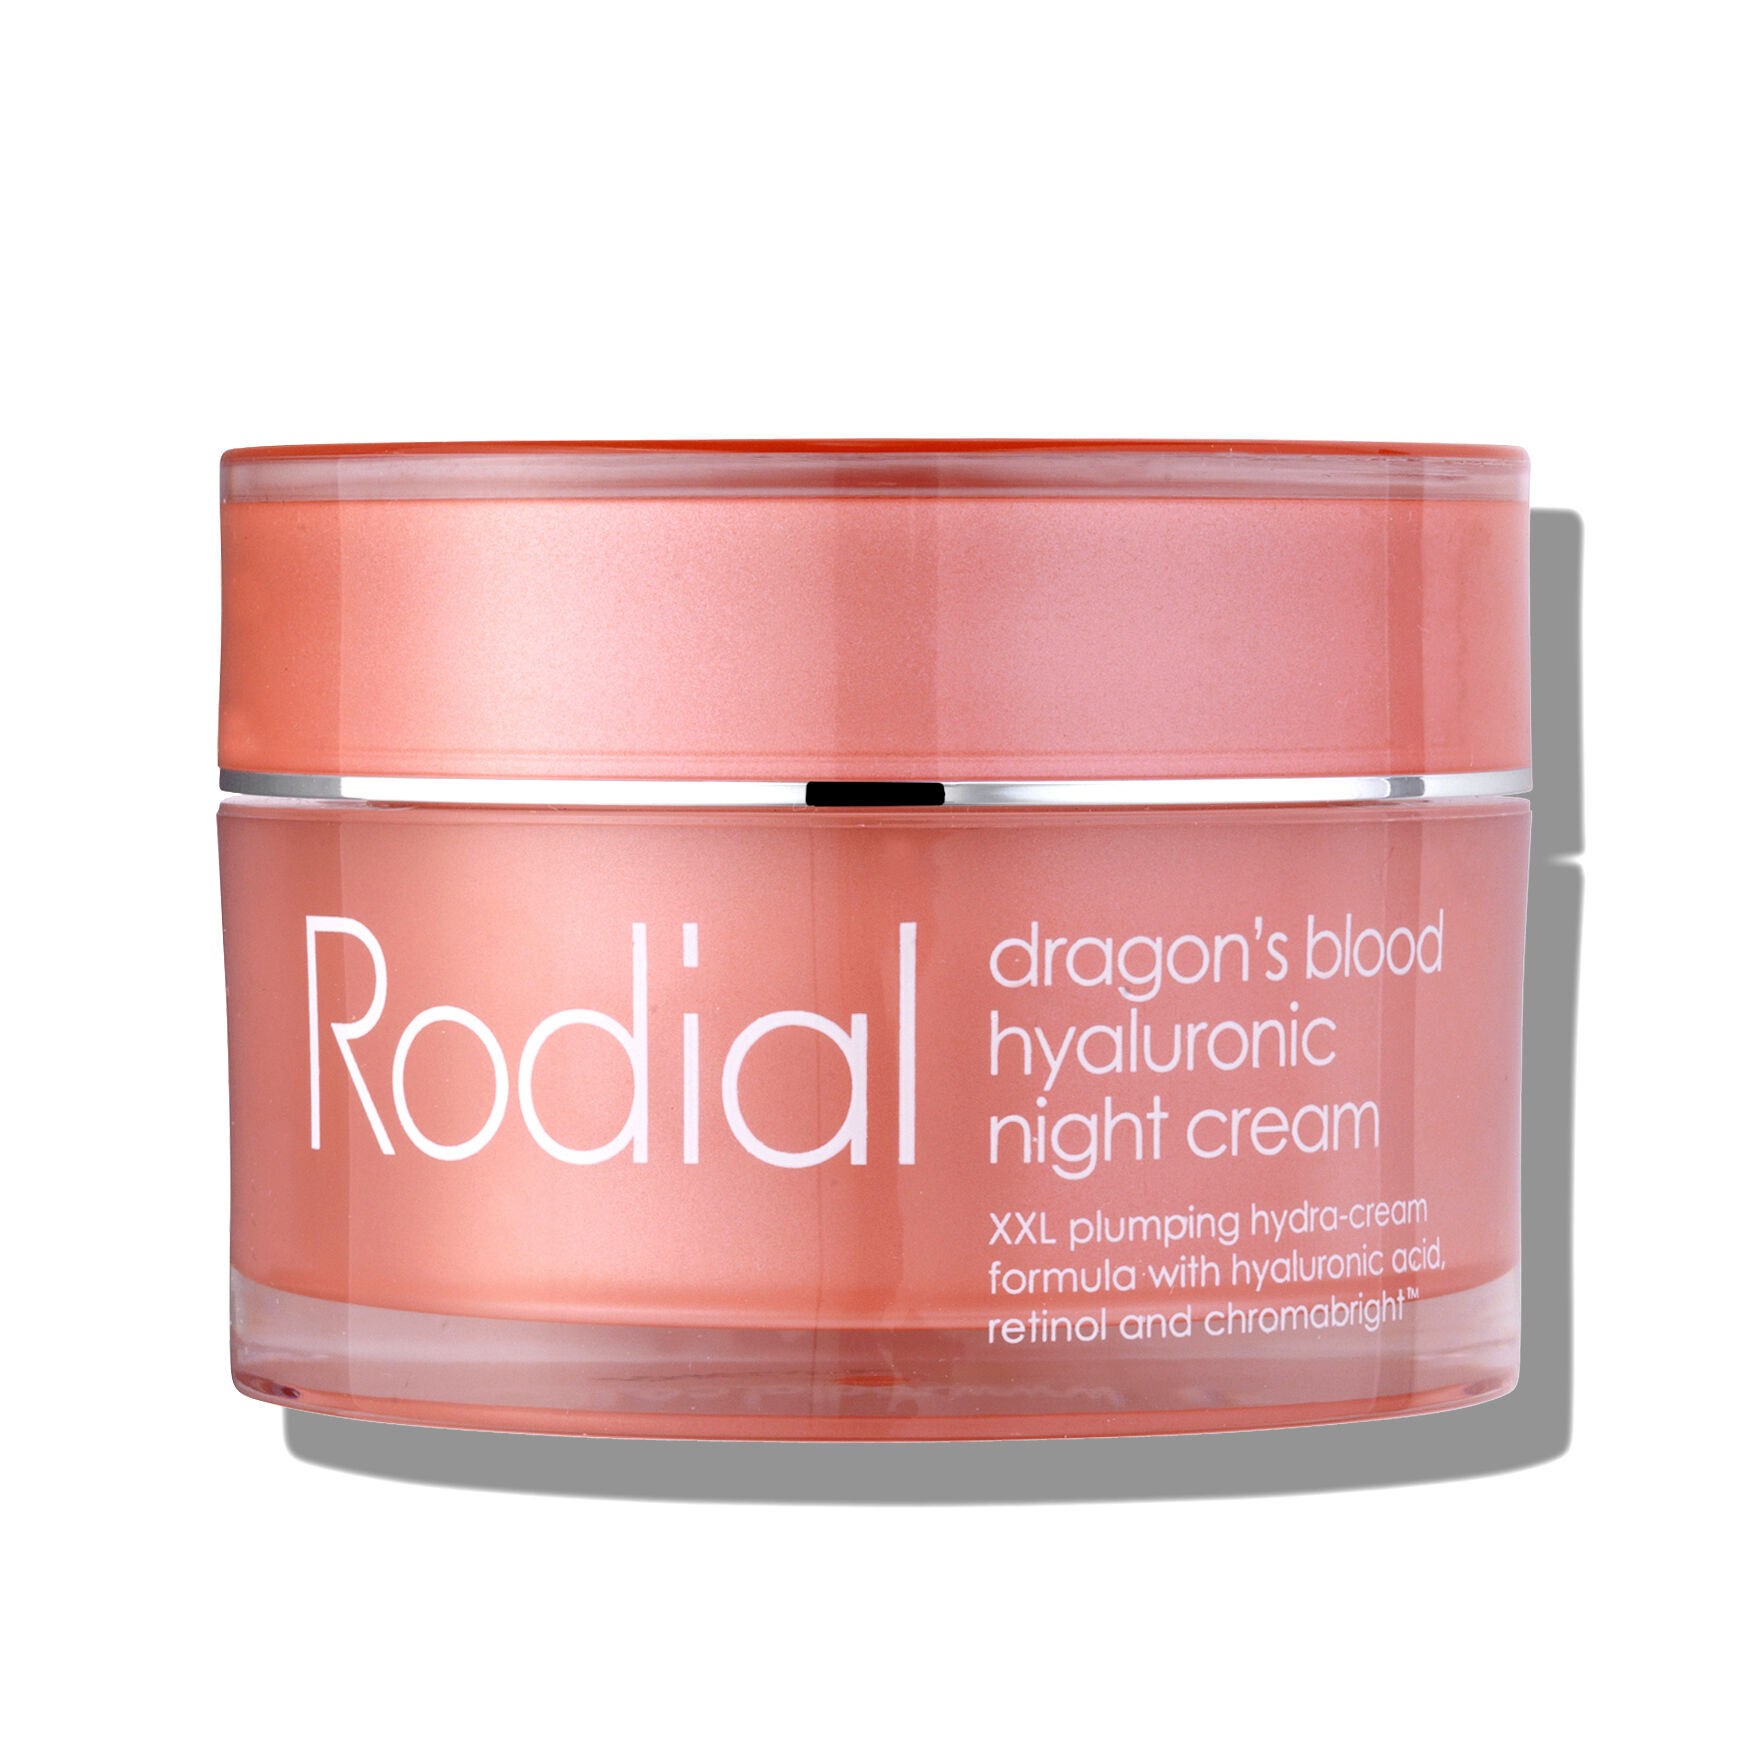 Rodial - Dragon's Blood Night Cream by Rodial